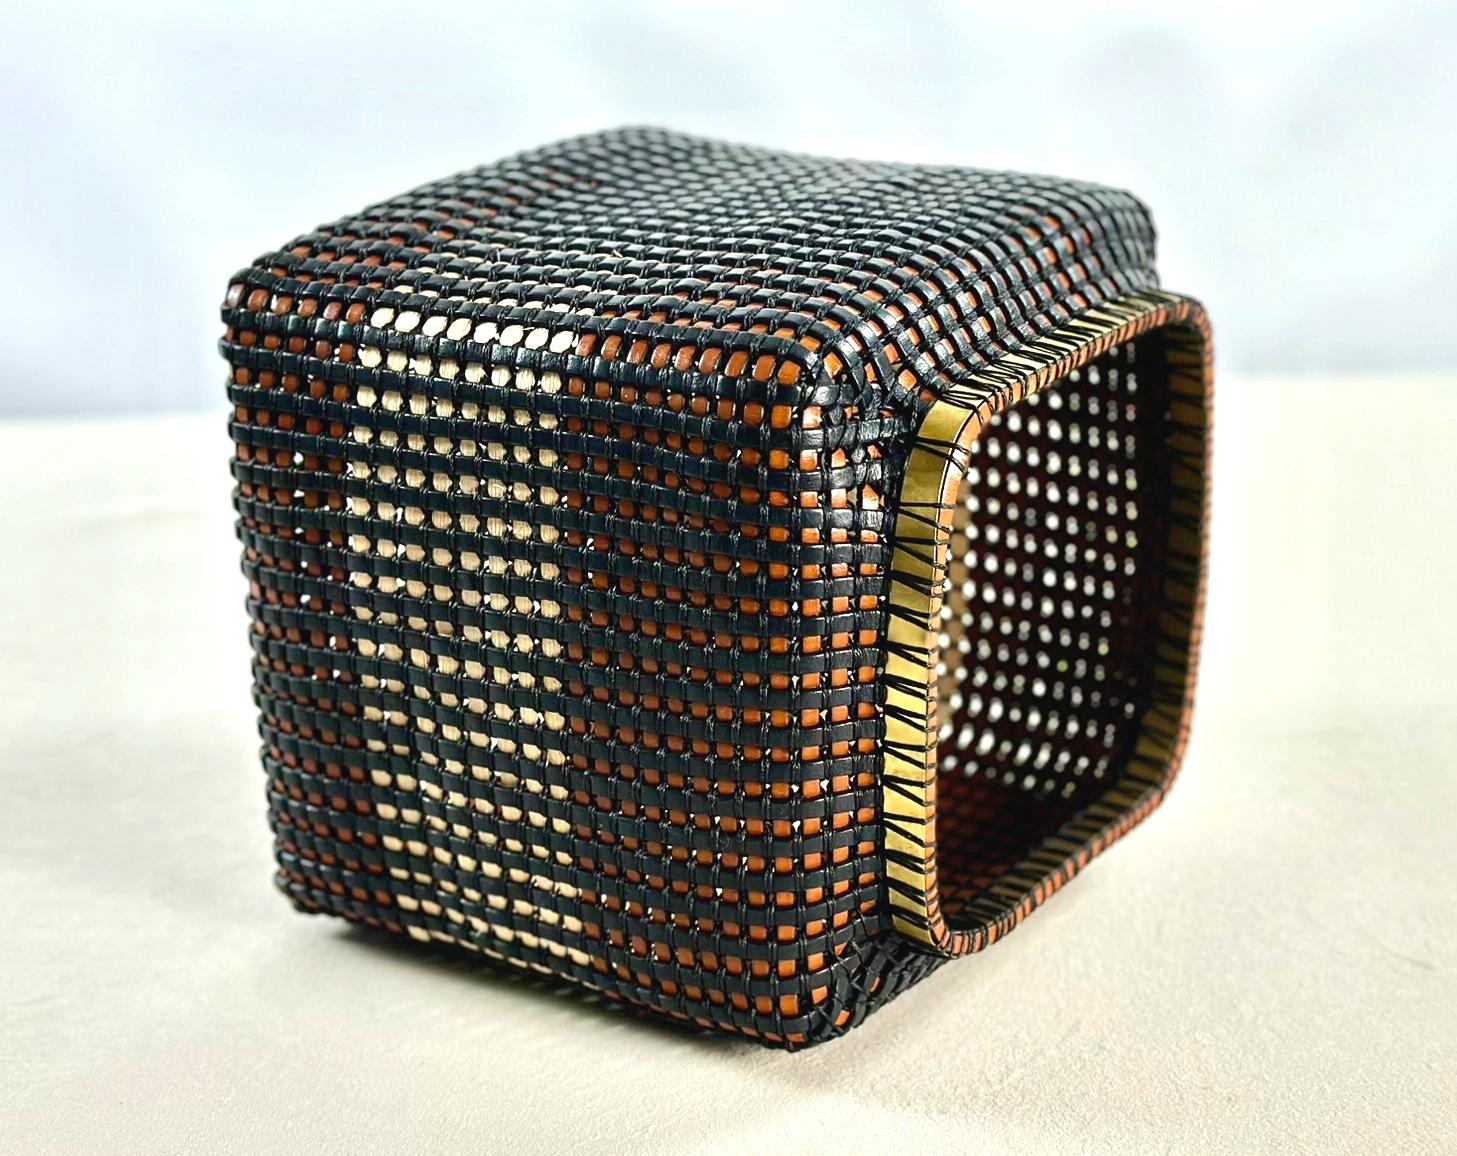 Spanish Chinese Tibor Inspired Leather & Cane Handmade Basket Black, Tan & Ivory Color For Sale